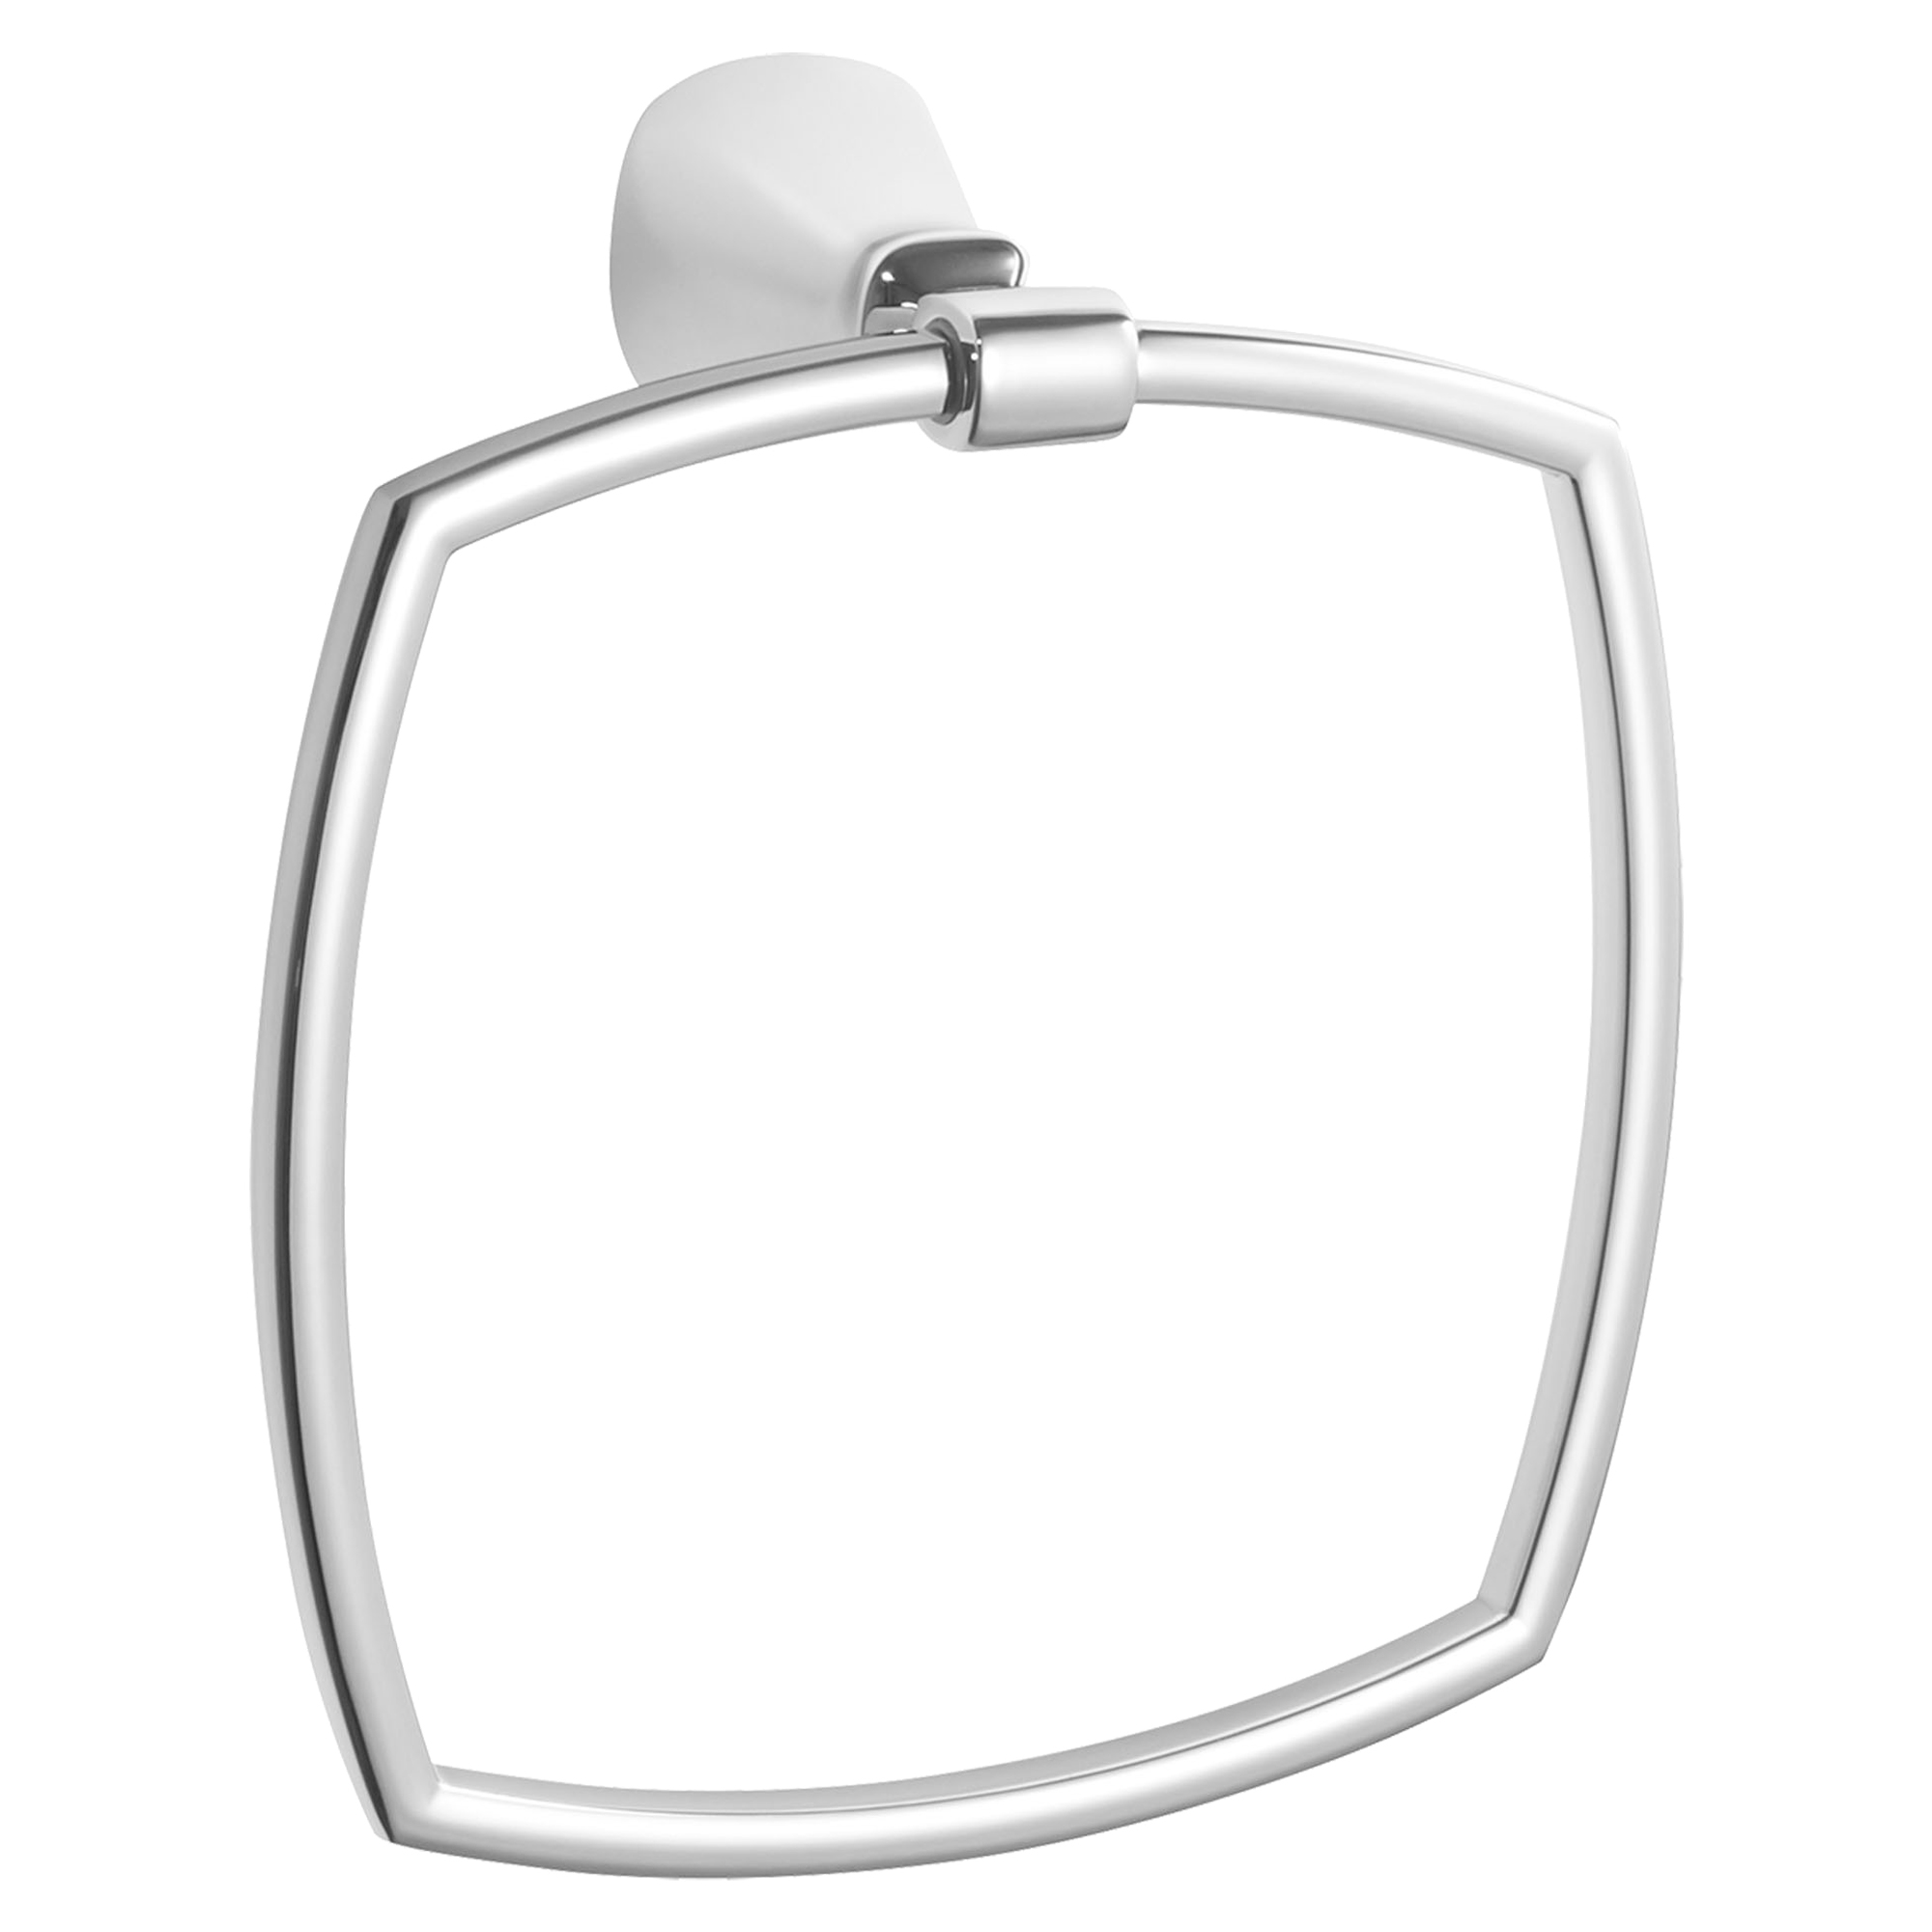 Edgemere 7-1/4" Towel Ring in Polished Chrome